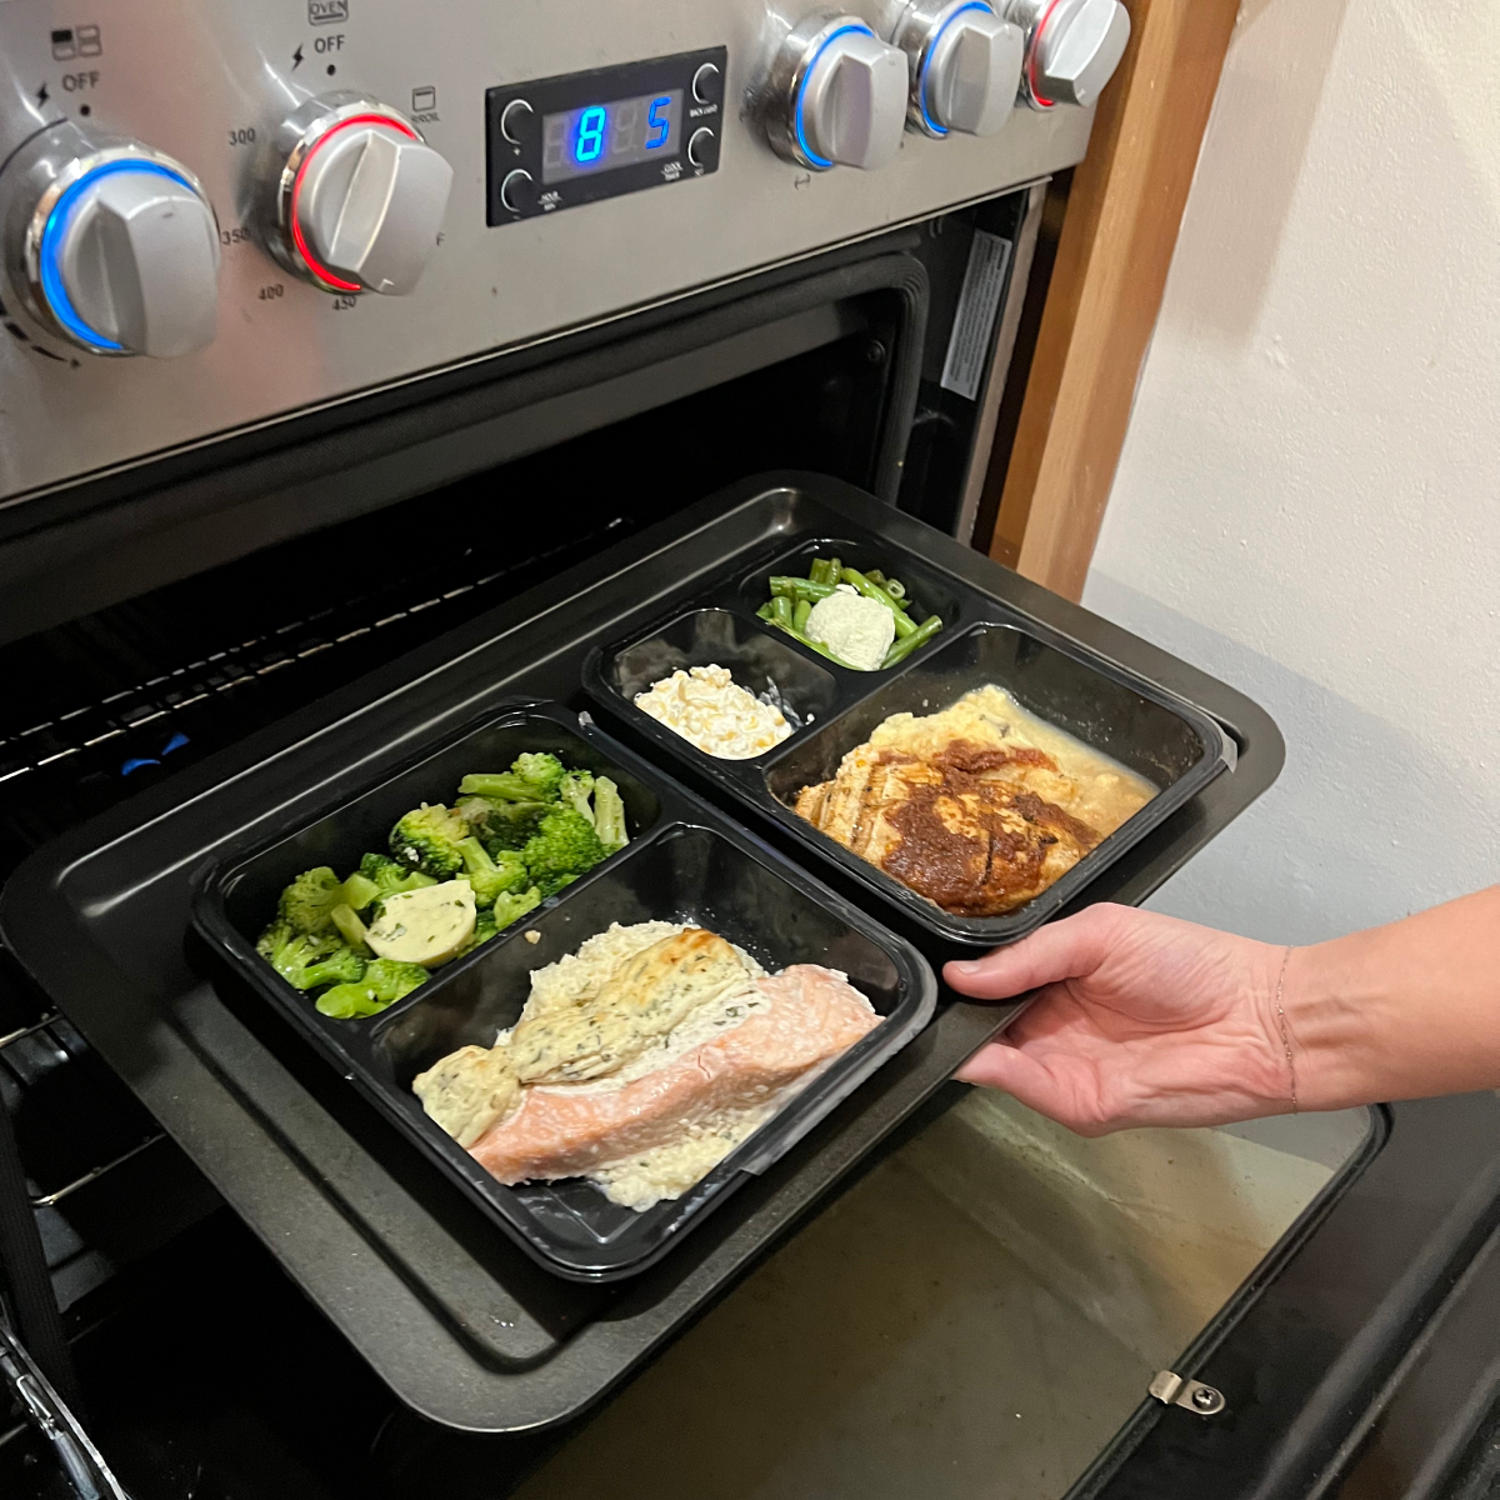 factor meal delivery review: a fast, reliable game changer for anyone who hates cooking